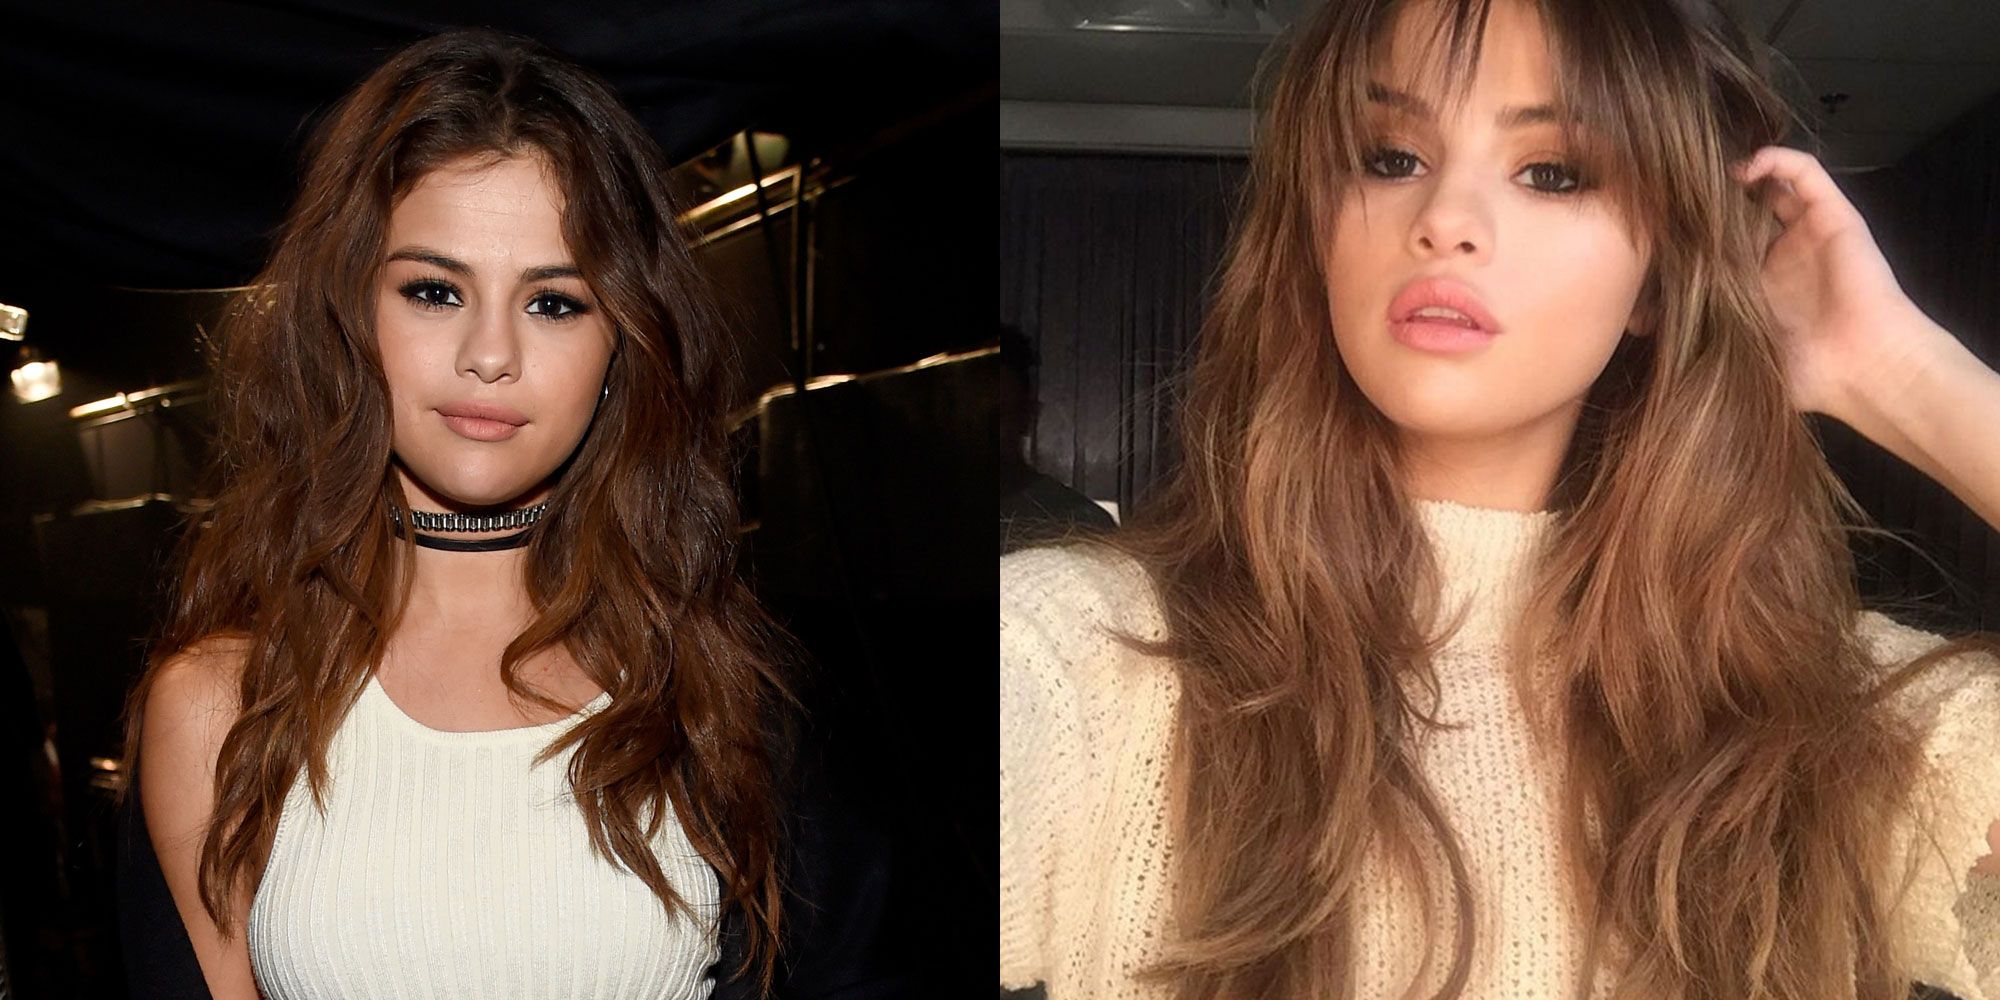 Selena Gomez Gets Bangs - What Celebrities Look Like With and Without Bangs